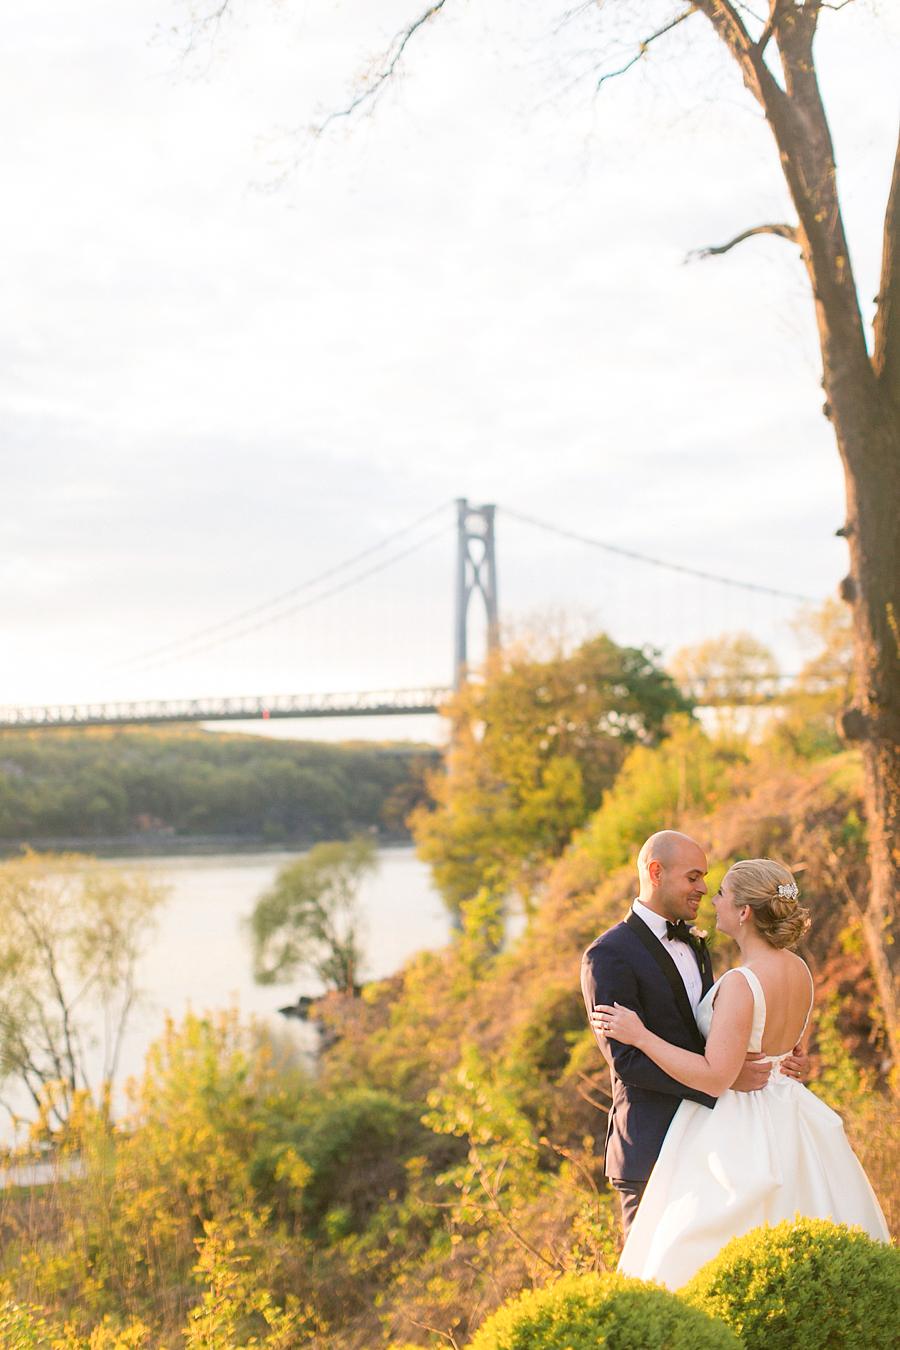 The Grandview Wedding Photos - Amy Rizzuto Photography-42